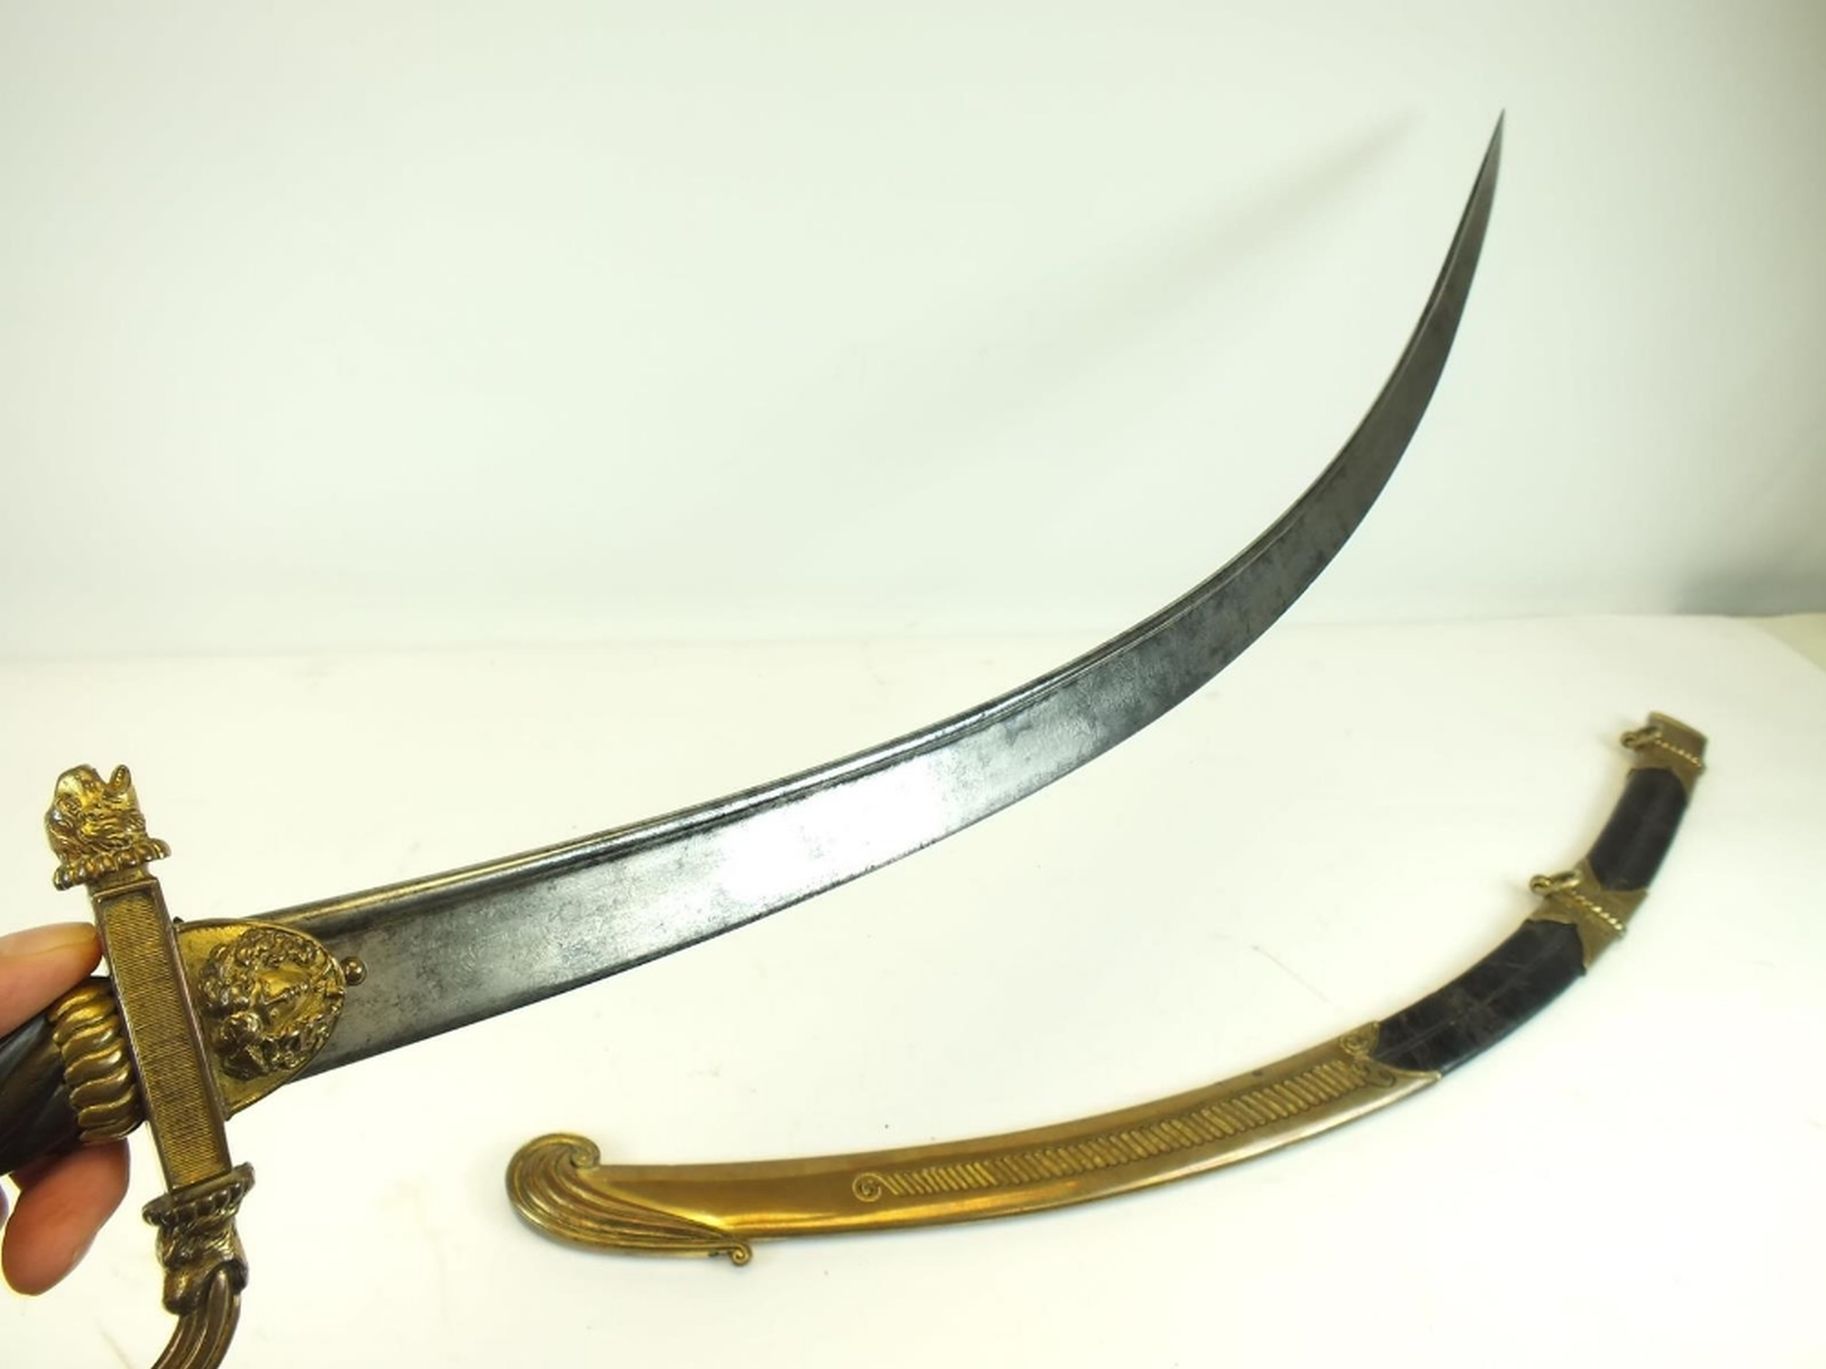 A LATE 18TH OR EARLY 19TH CENTURY PRESENTATION QUALITY SABRE BY PROSSER, 83cm sharply curved pipe- - Image 15 of 18